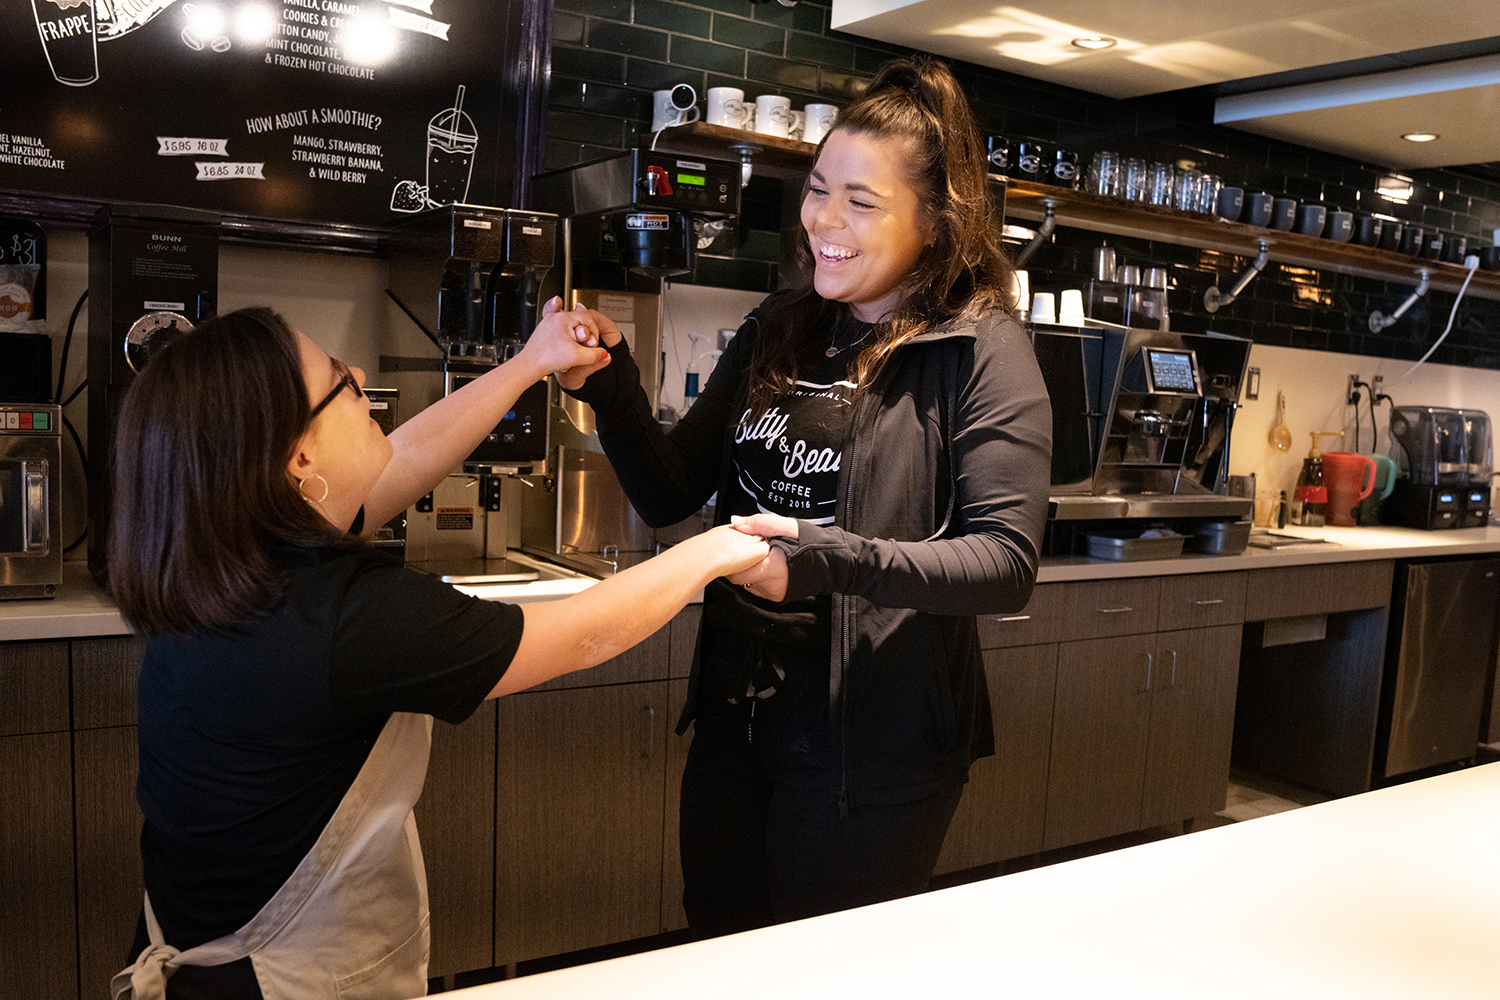 Two female employees smiling and dancing behind the serving counter. The coffee equipment work area behind them is clean and tidy.